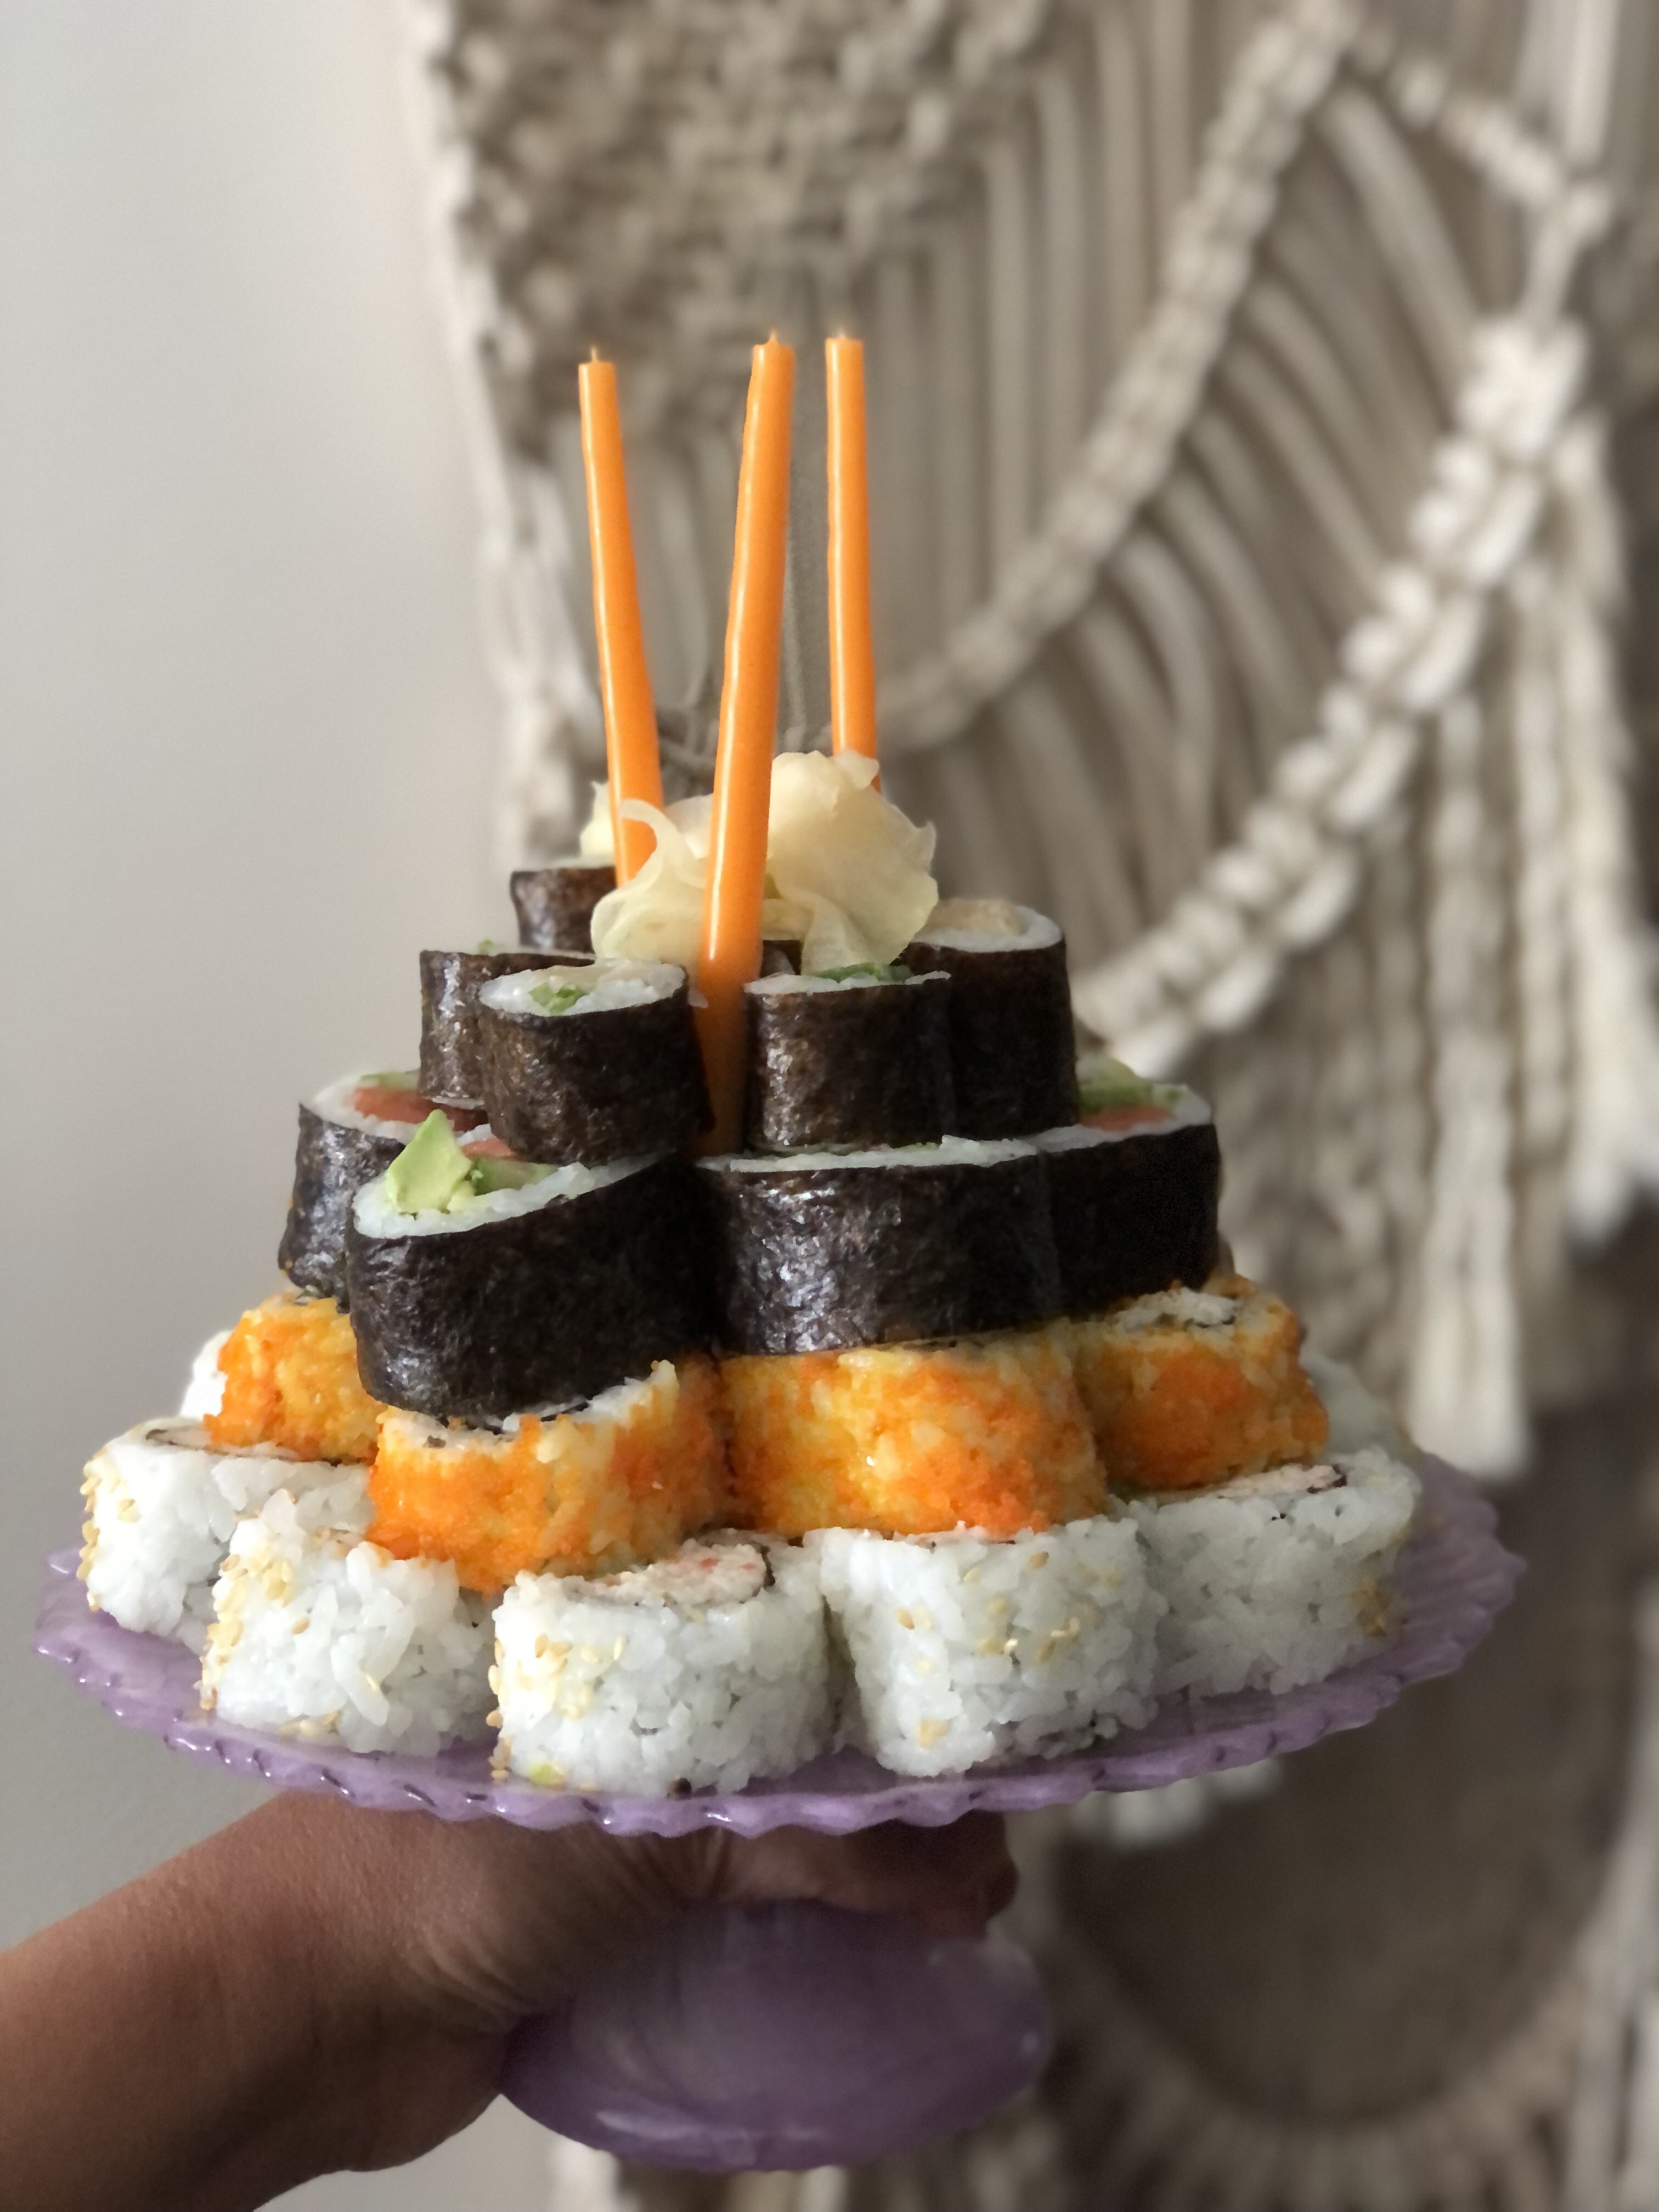 Pretty Sushi Candle Gift Candles Sushi Gift Set 3 Piece 